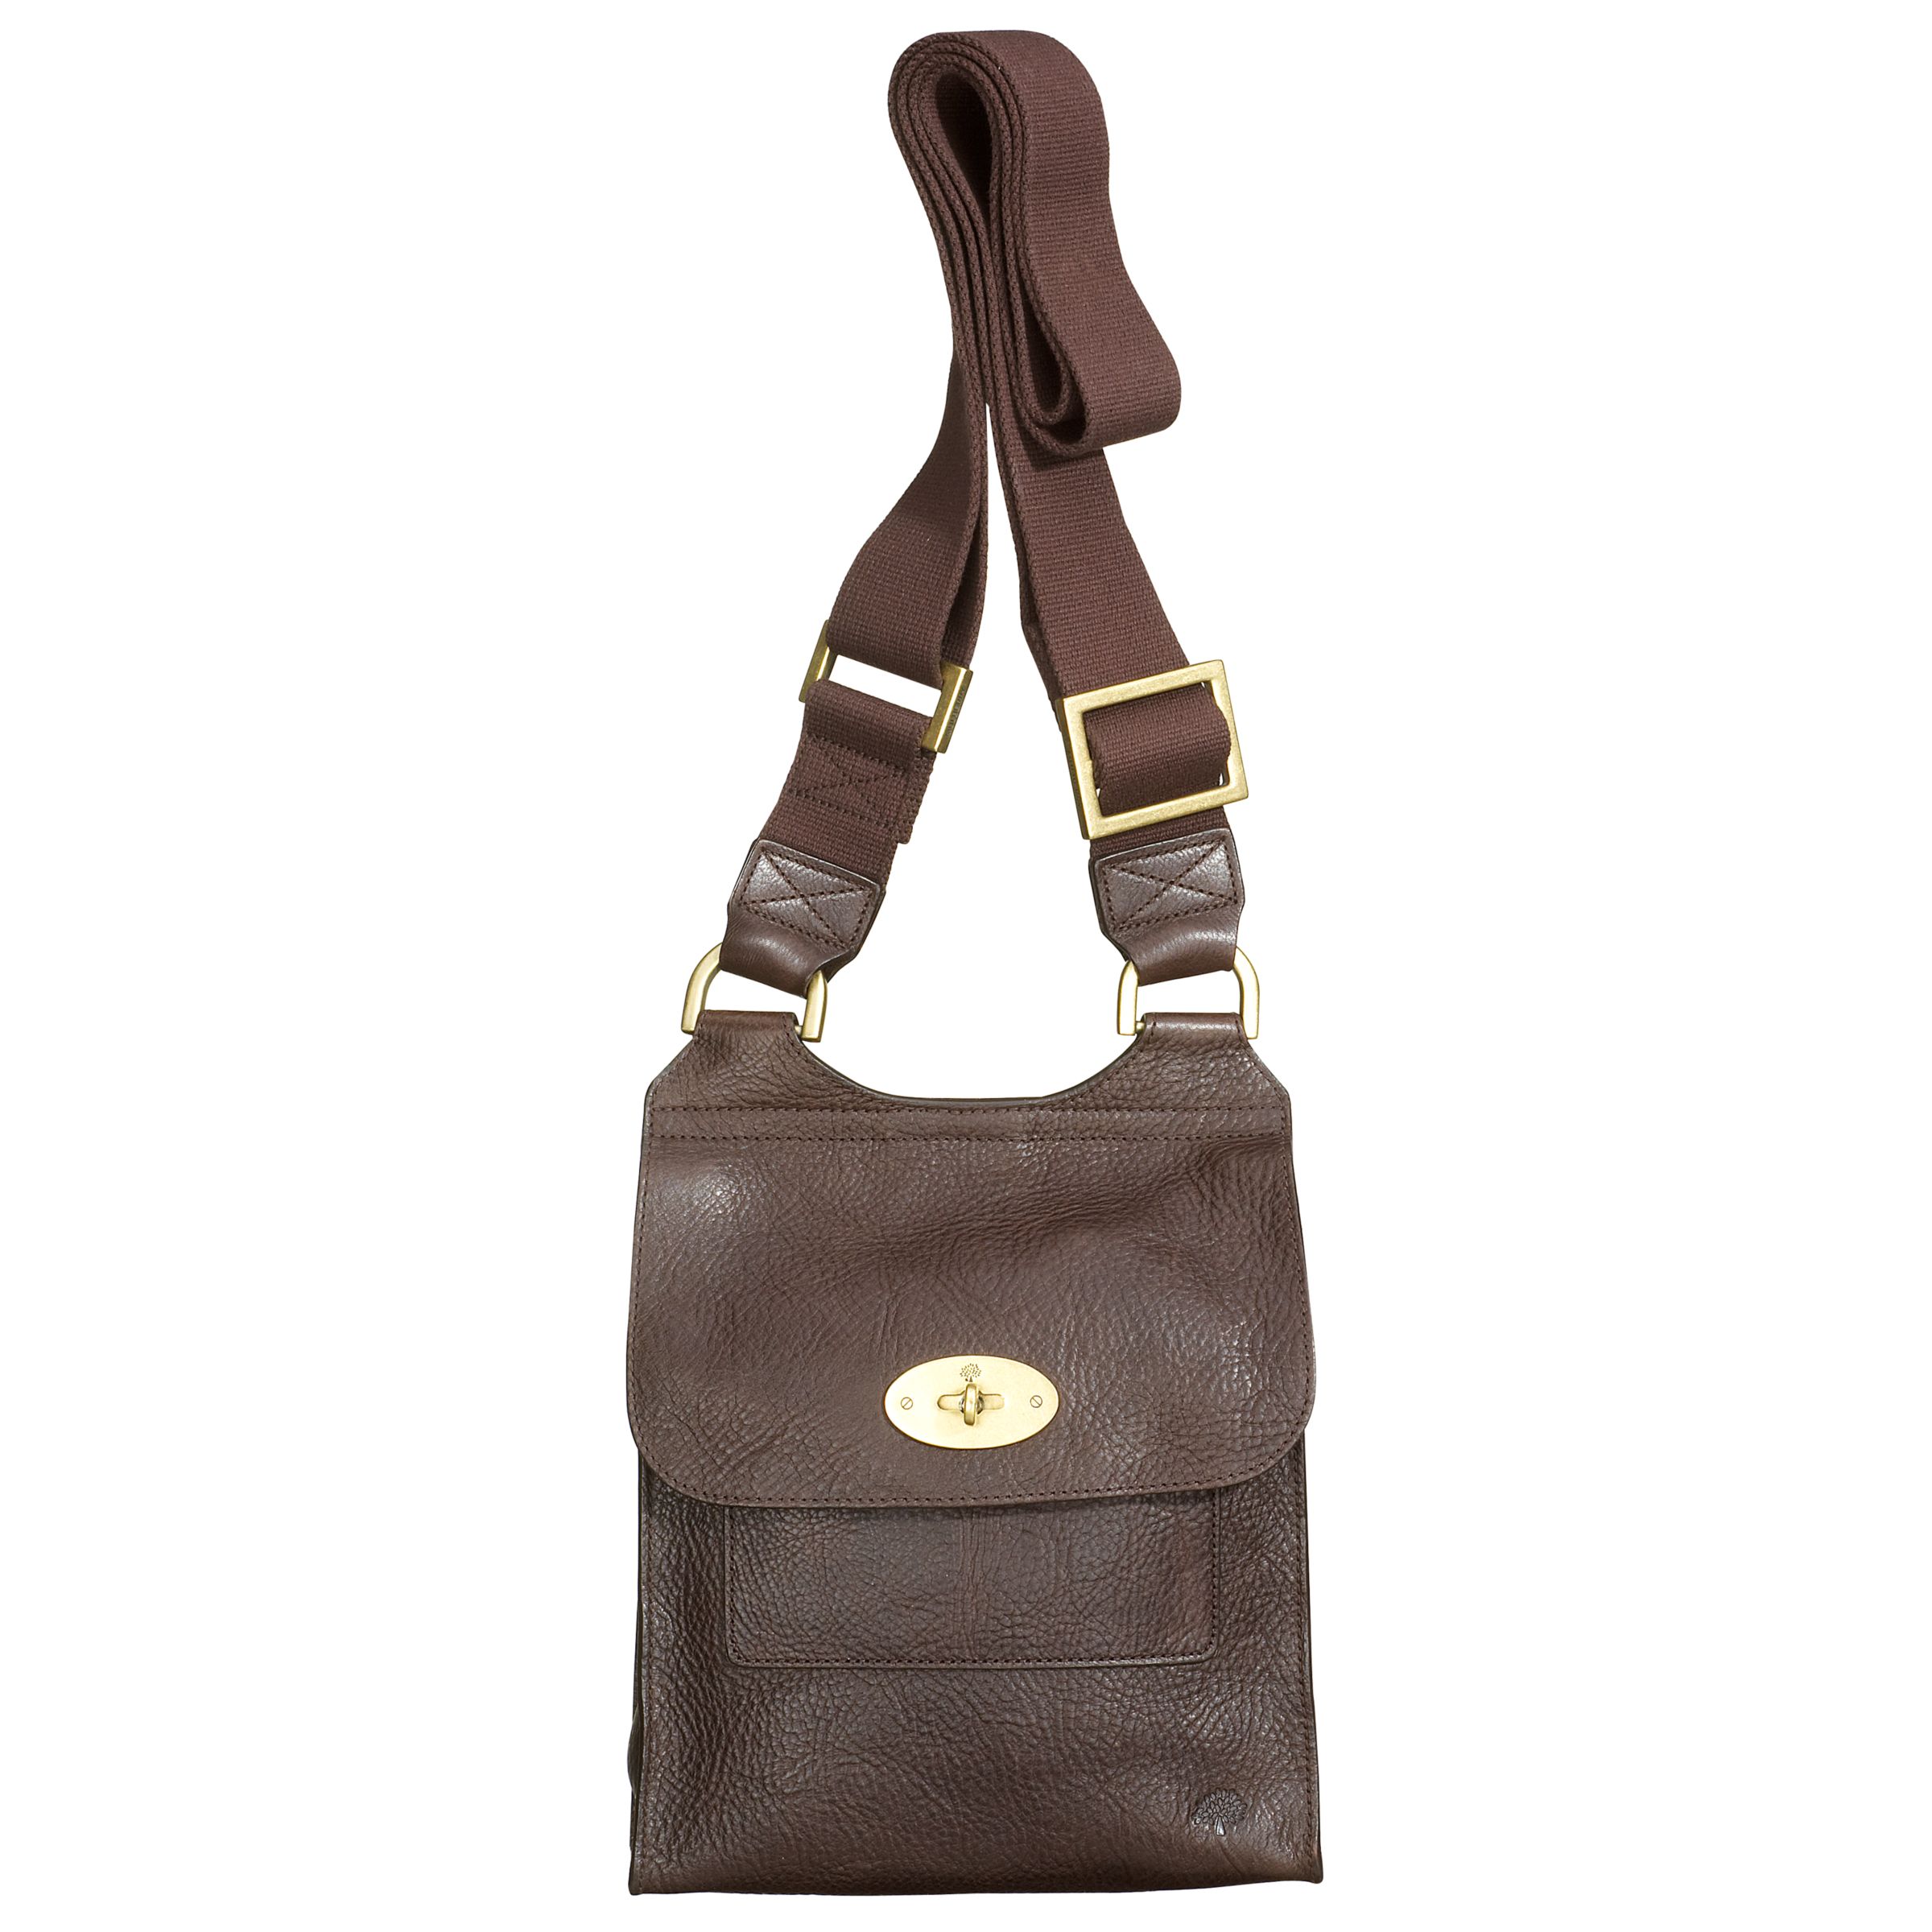 Mulberry Antony Leather Reporter Bag, Chocolate at JohnLewis